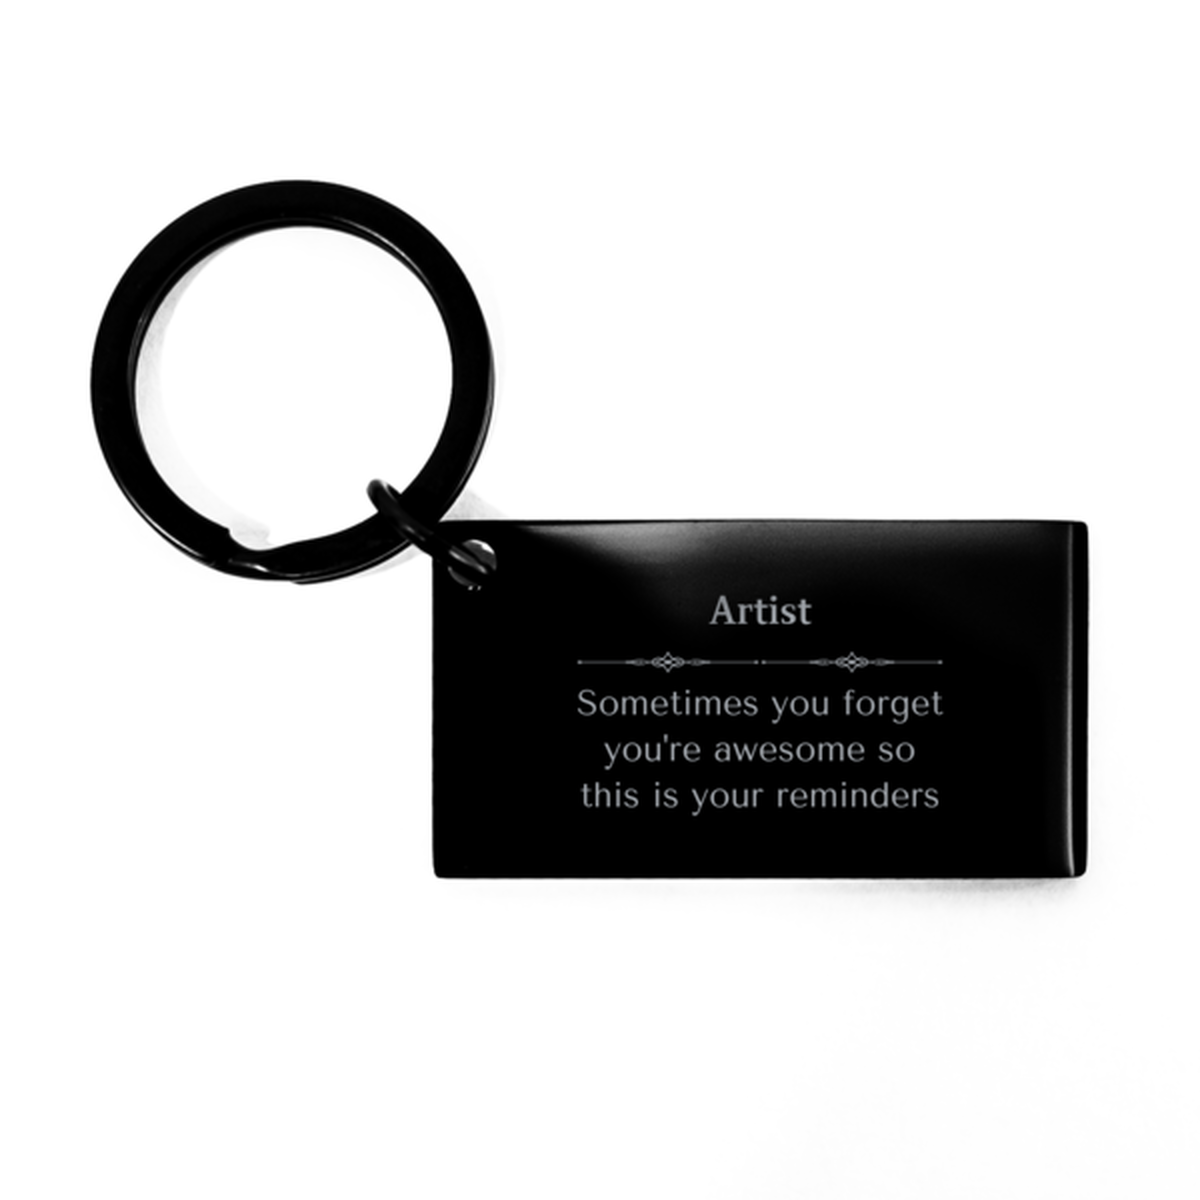 Sentimental Artist Keychain, Compliance Officer Sometimes you forget you're awesome so this is your reminders, Graduation Christmas Birthday Gifts for Artist, Men, Women, Coworkers